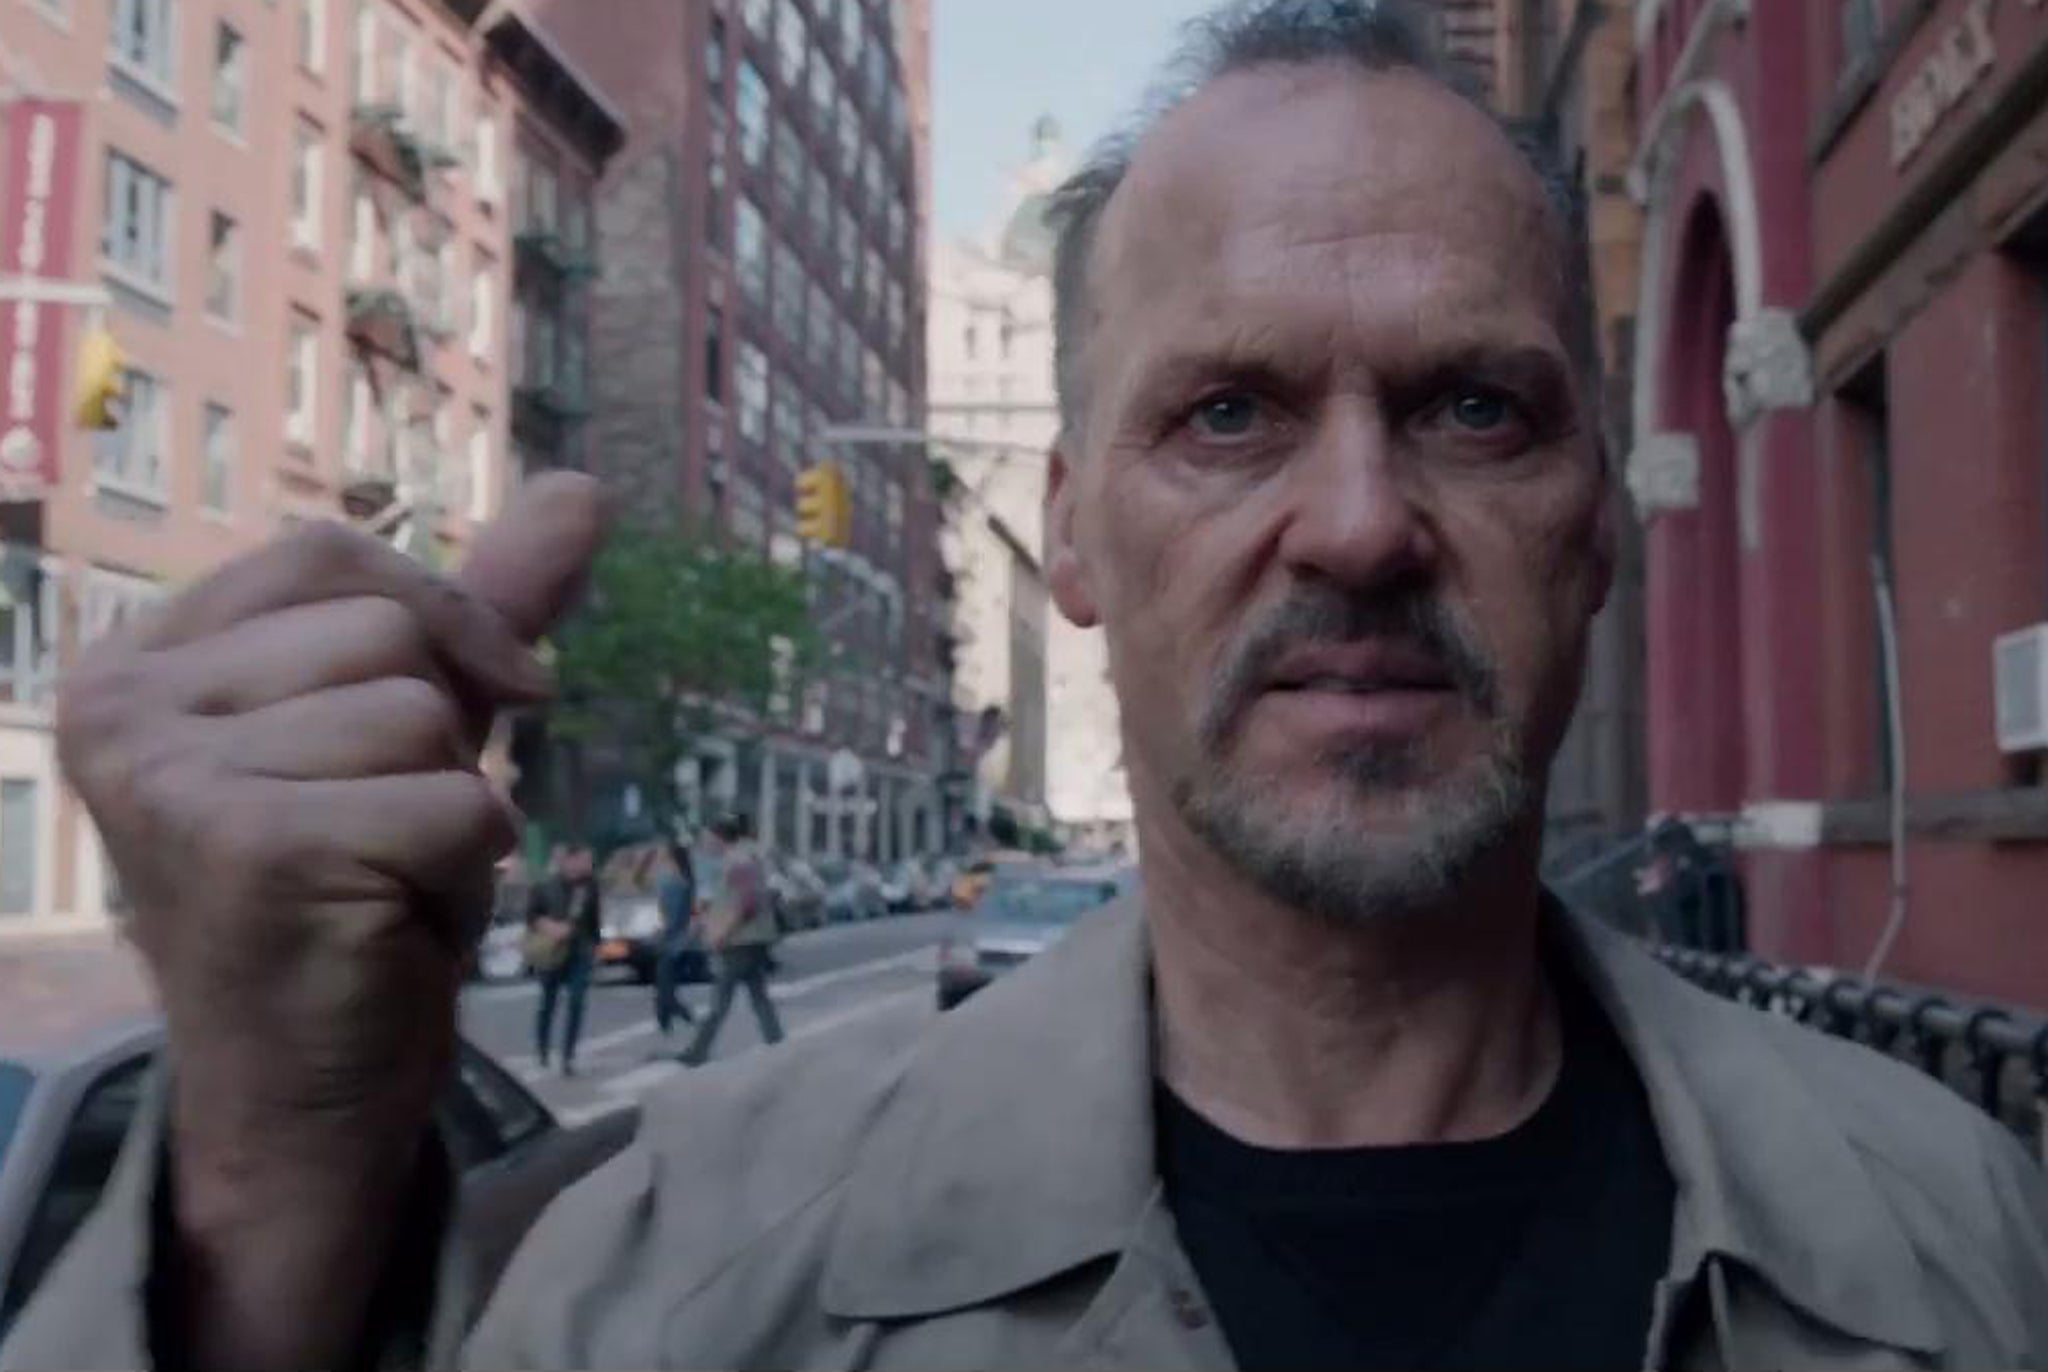 Michael Keaton stars as a washed-up superhero actor in Birdman